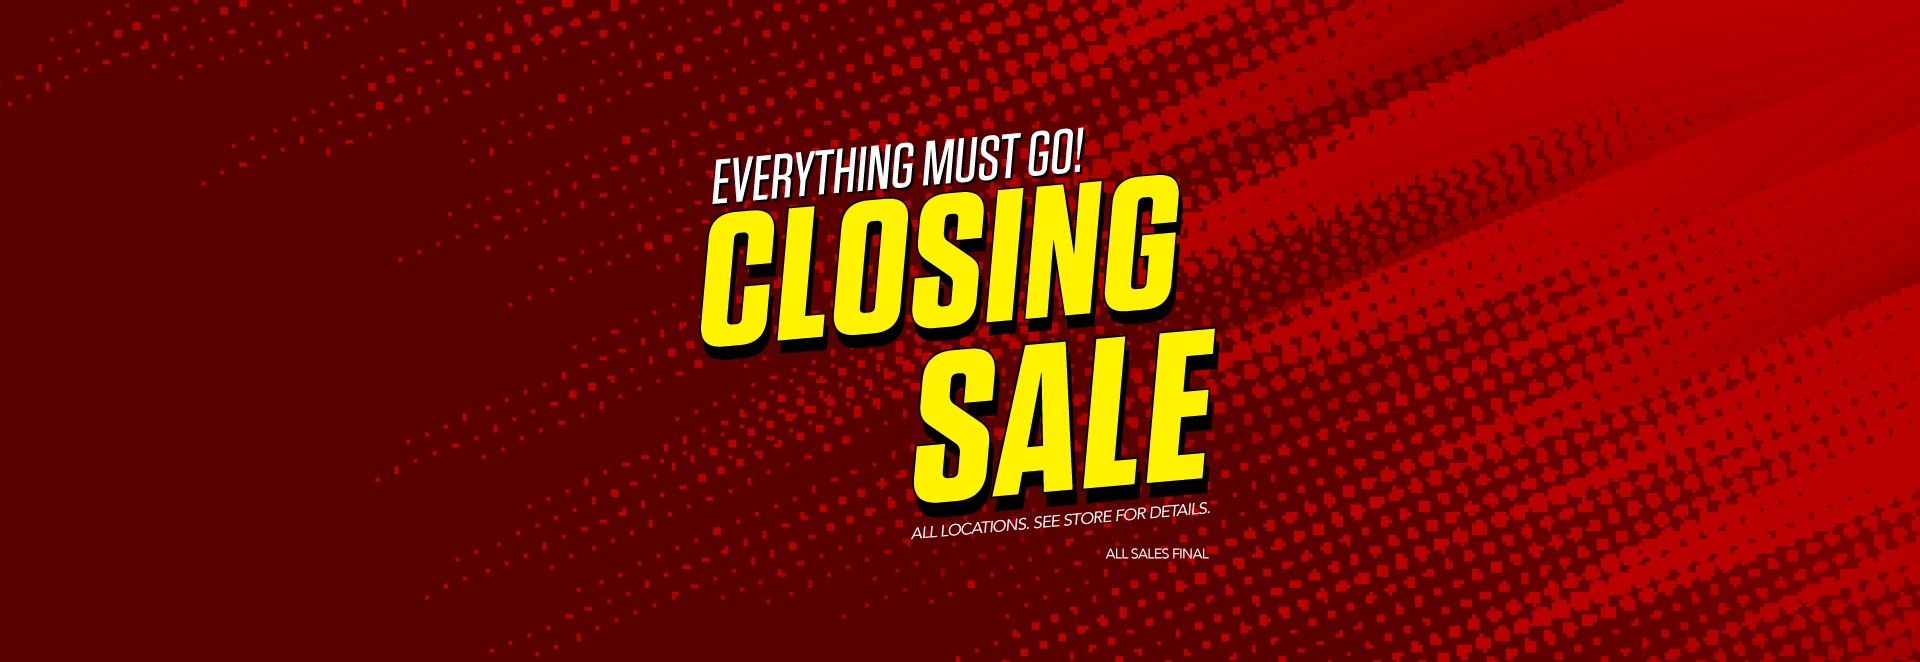 Olympia Sports   Homepage   Store Closing 0001 